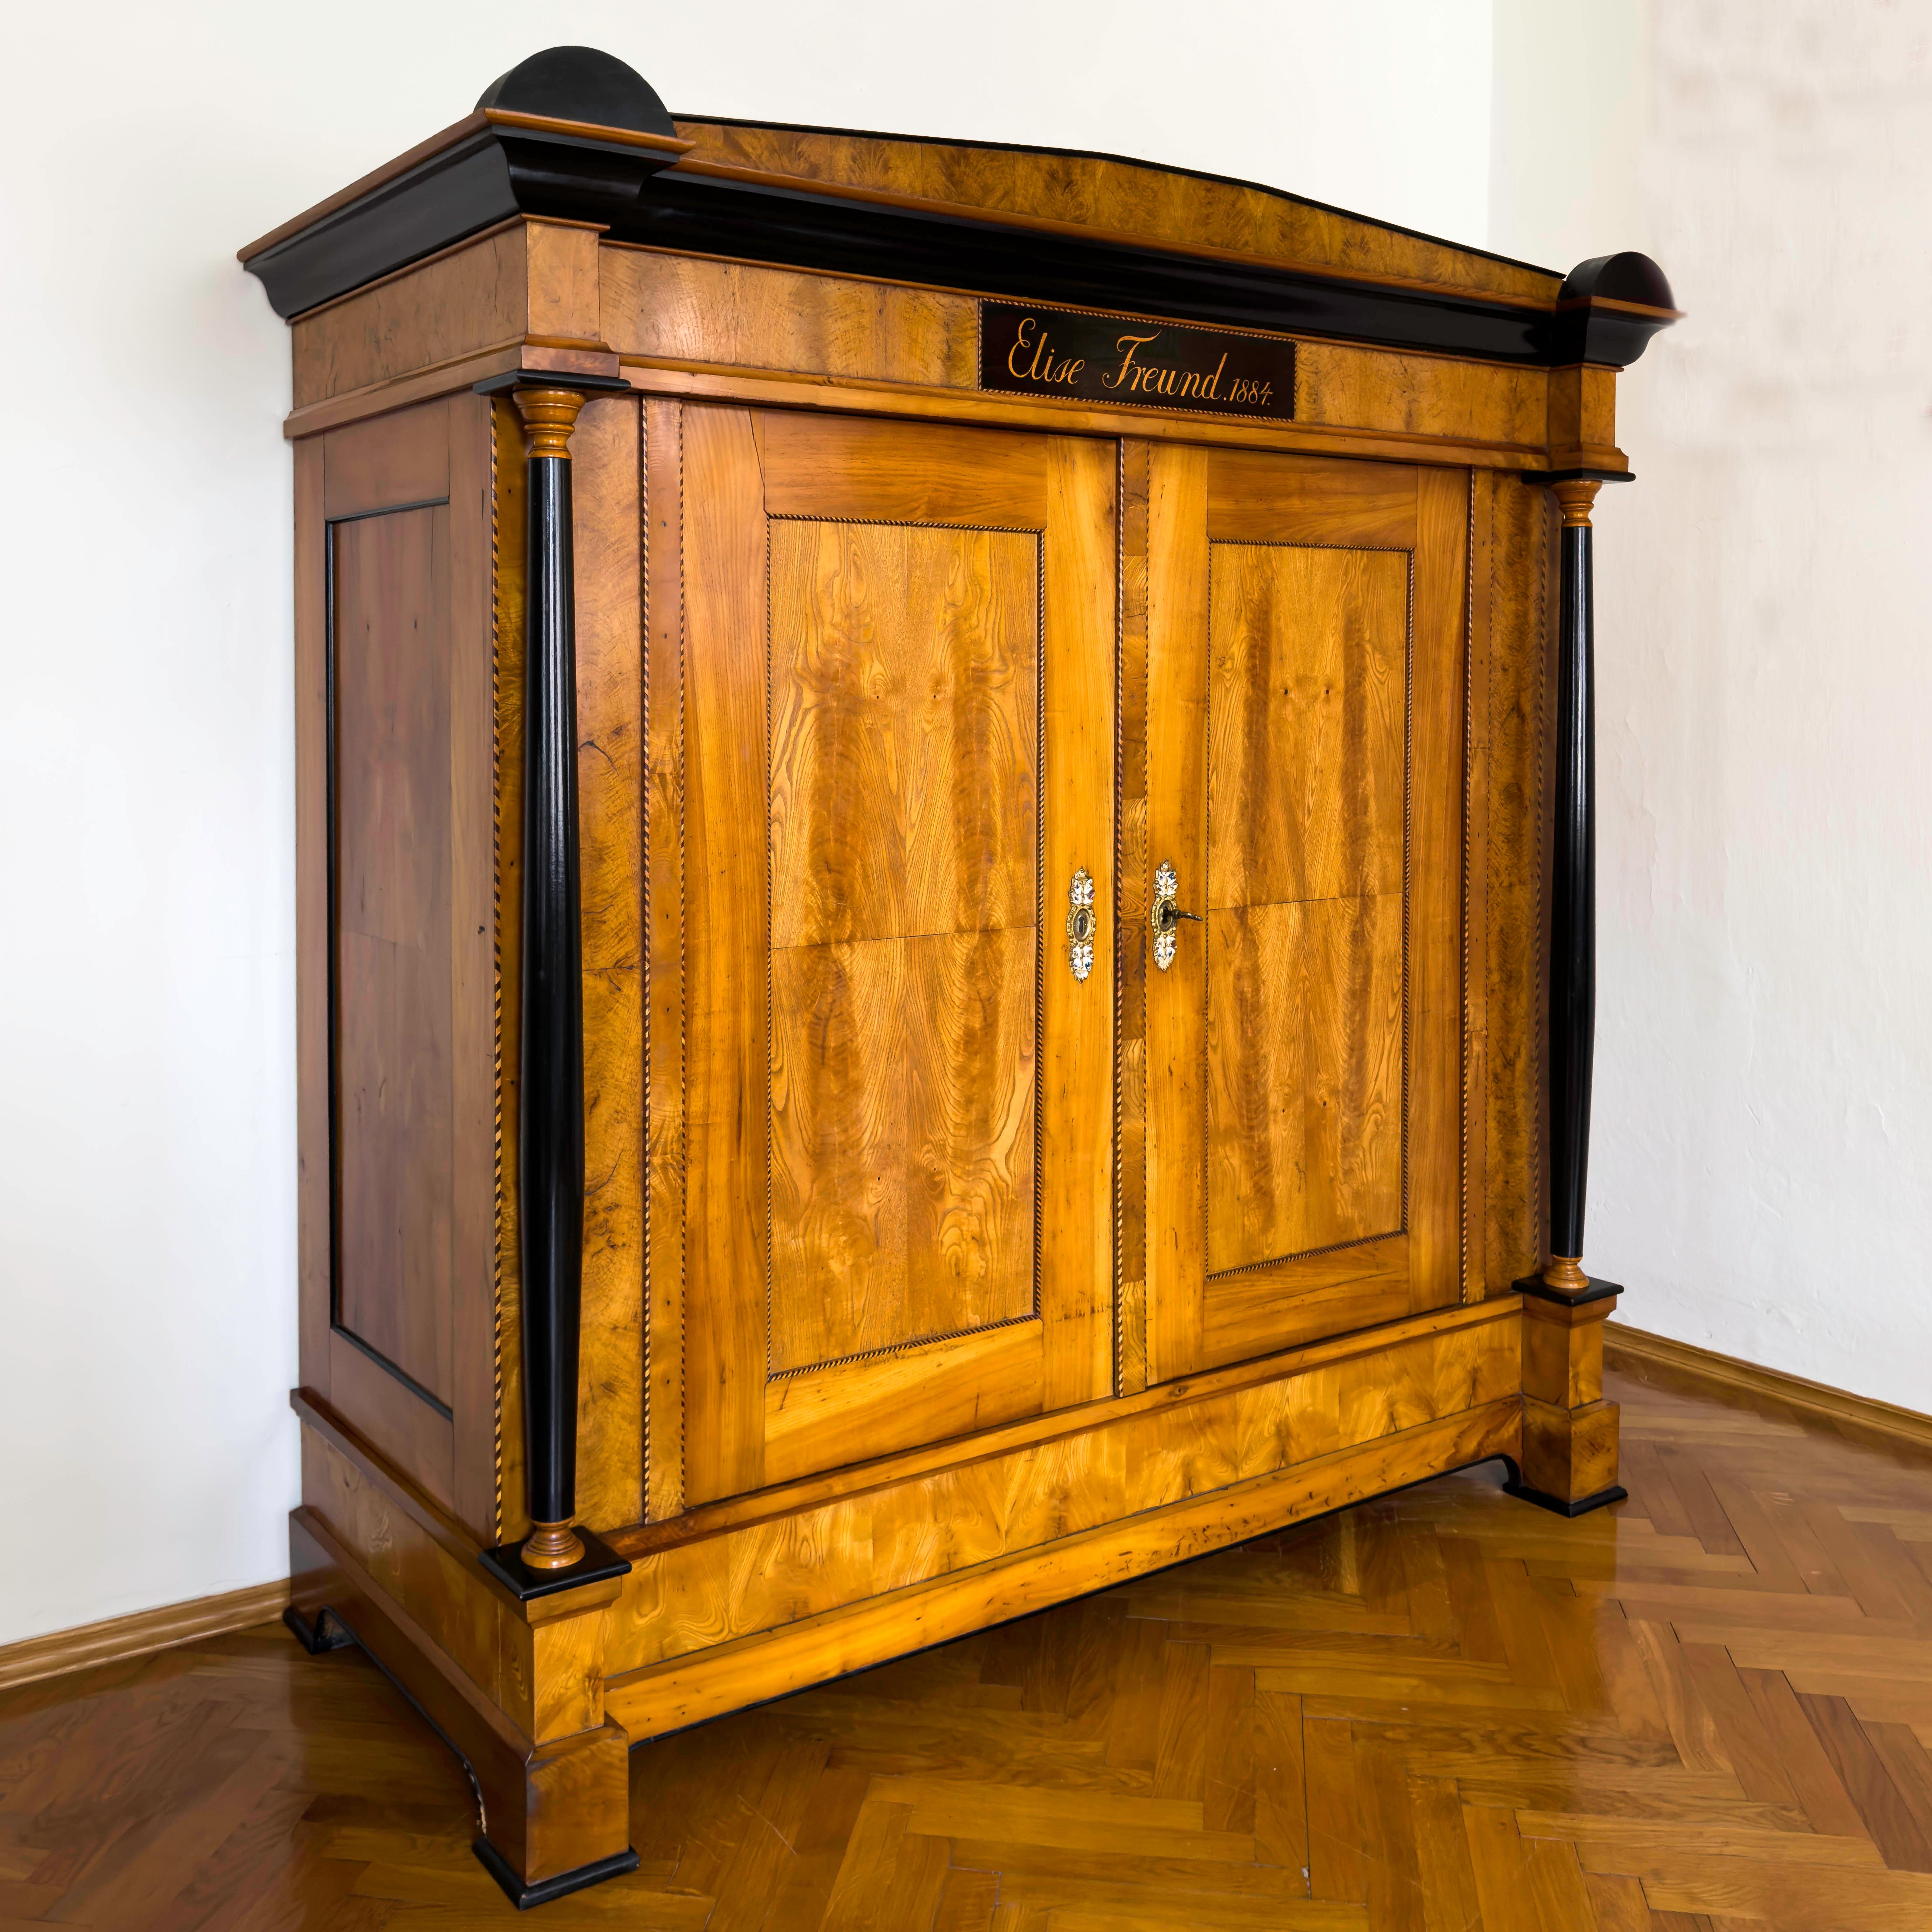 German Large Biedermeier-Style Wardrobe in Ash and Cherry, Dated 1884 For Sale